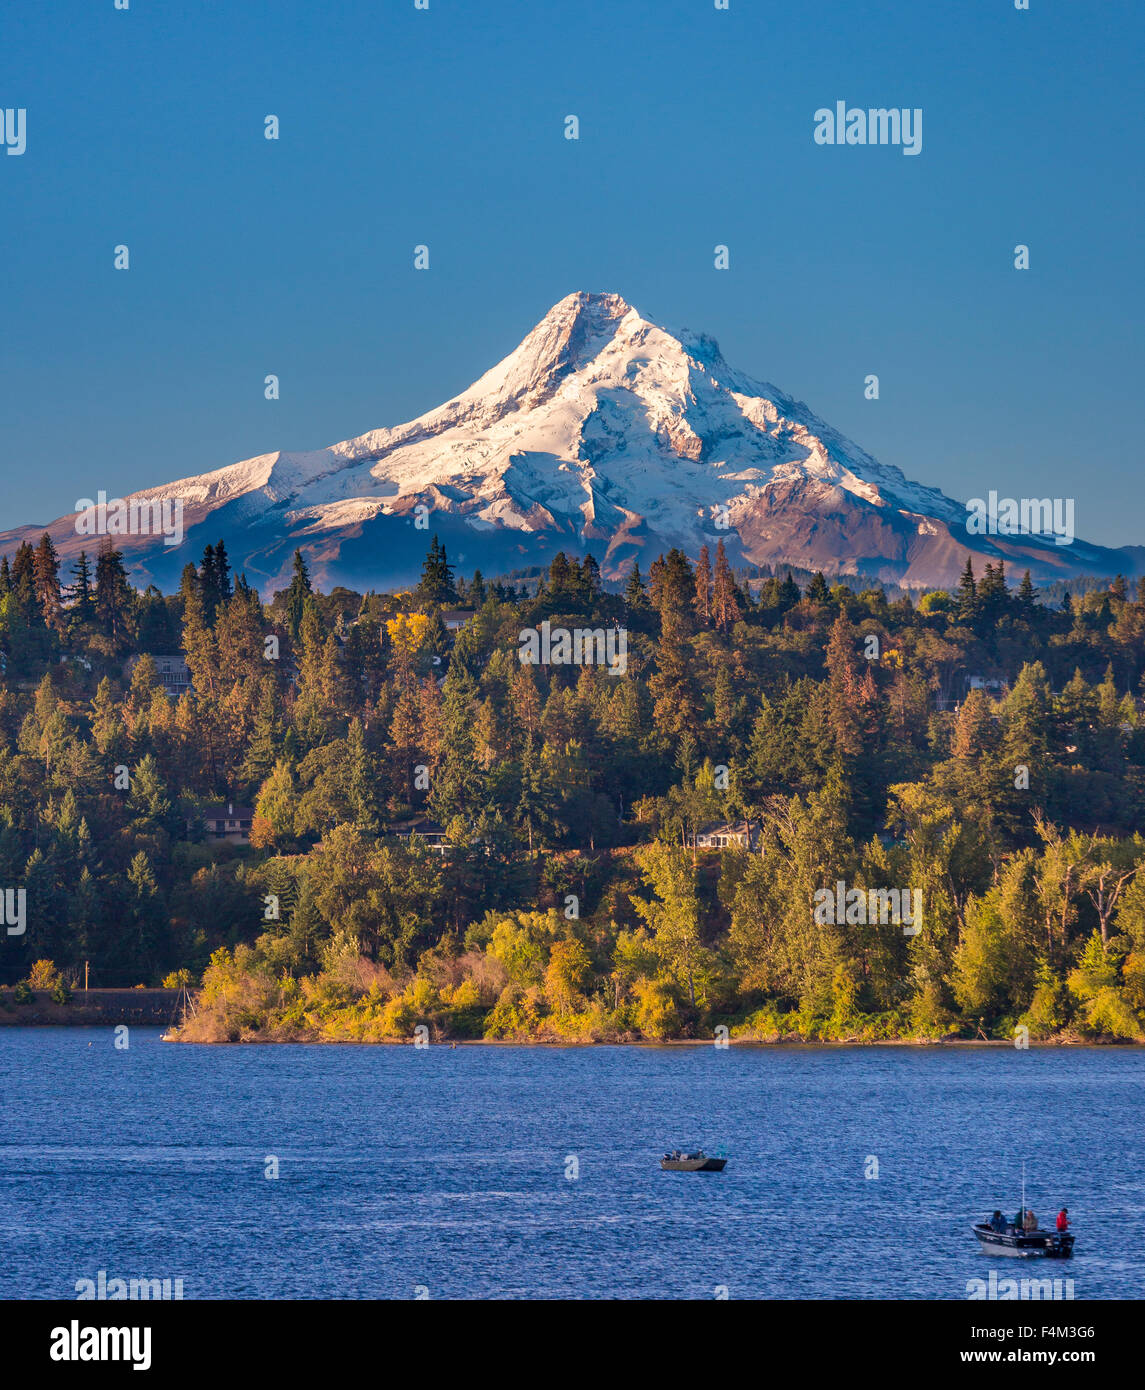 HOOD RIVER, OREGON, USA - Mount Hood, 11,241 ft (3,429 m) glaciated mountain in Cascade Range, and the Columbia River. Stock Photo